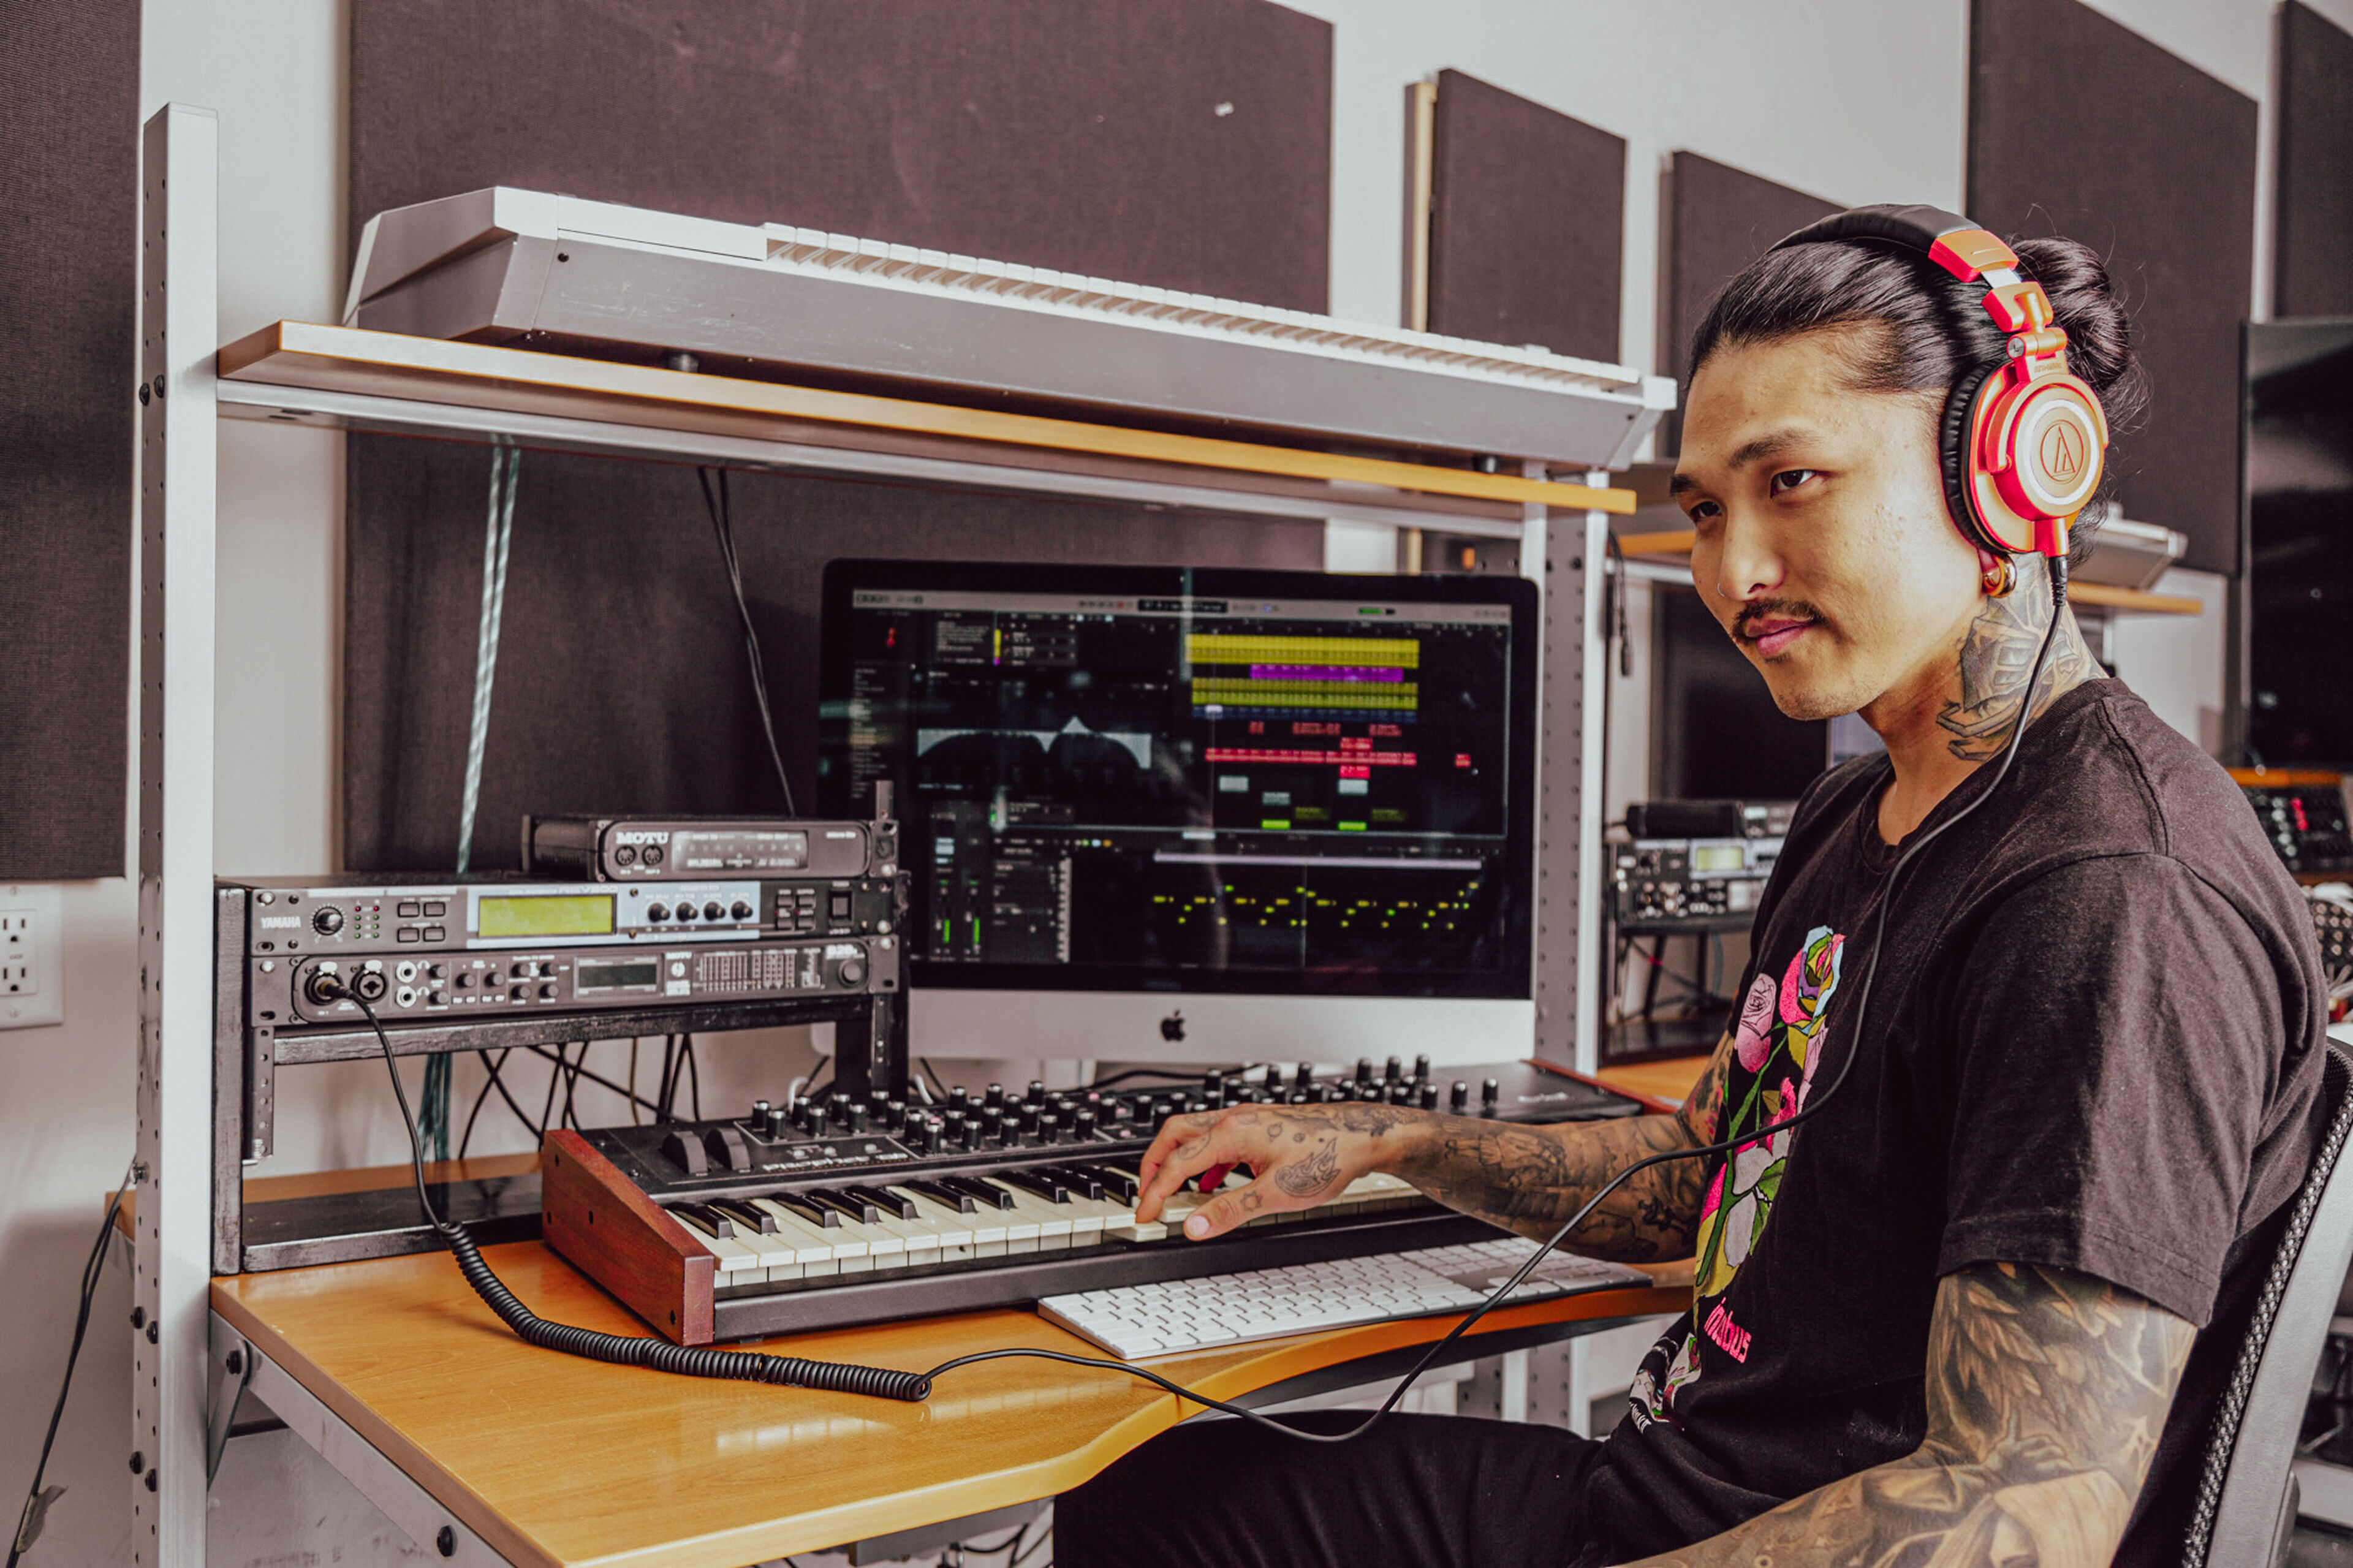 A tattooed music producer is focused on mixing tracks in a studio, with a MIDI keyboard and audio equipment surrounding him.